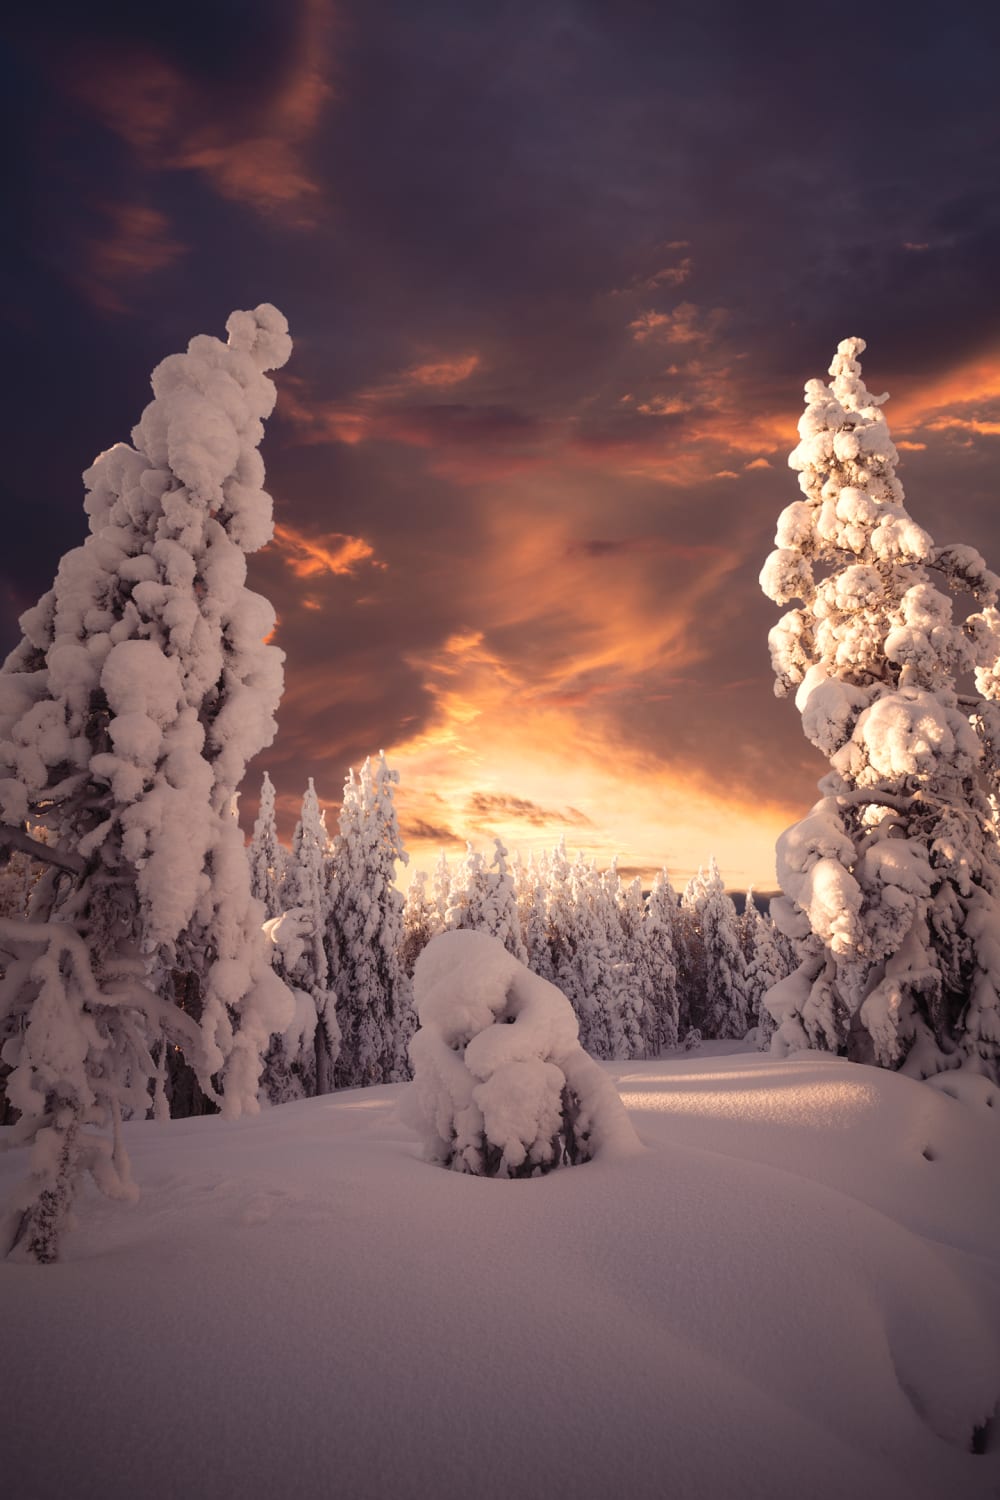 Last winter wasn't the coldest or the snowiest, but man it was pretty. Taken in northern Finland.